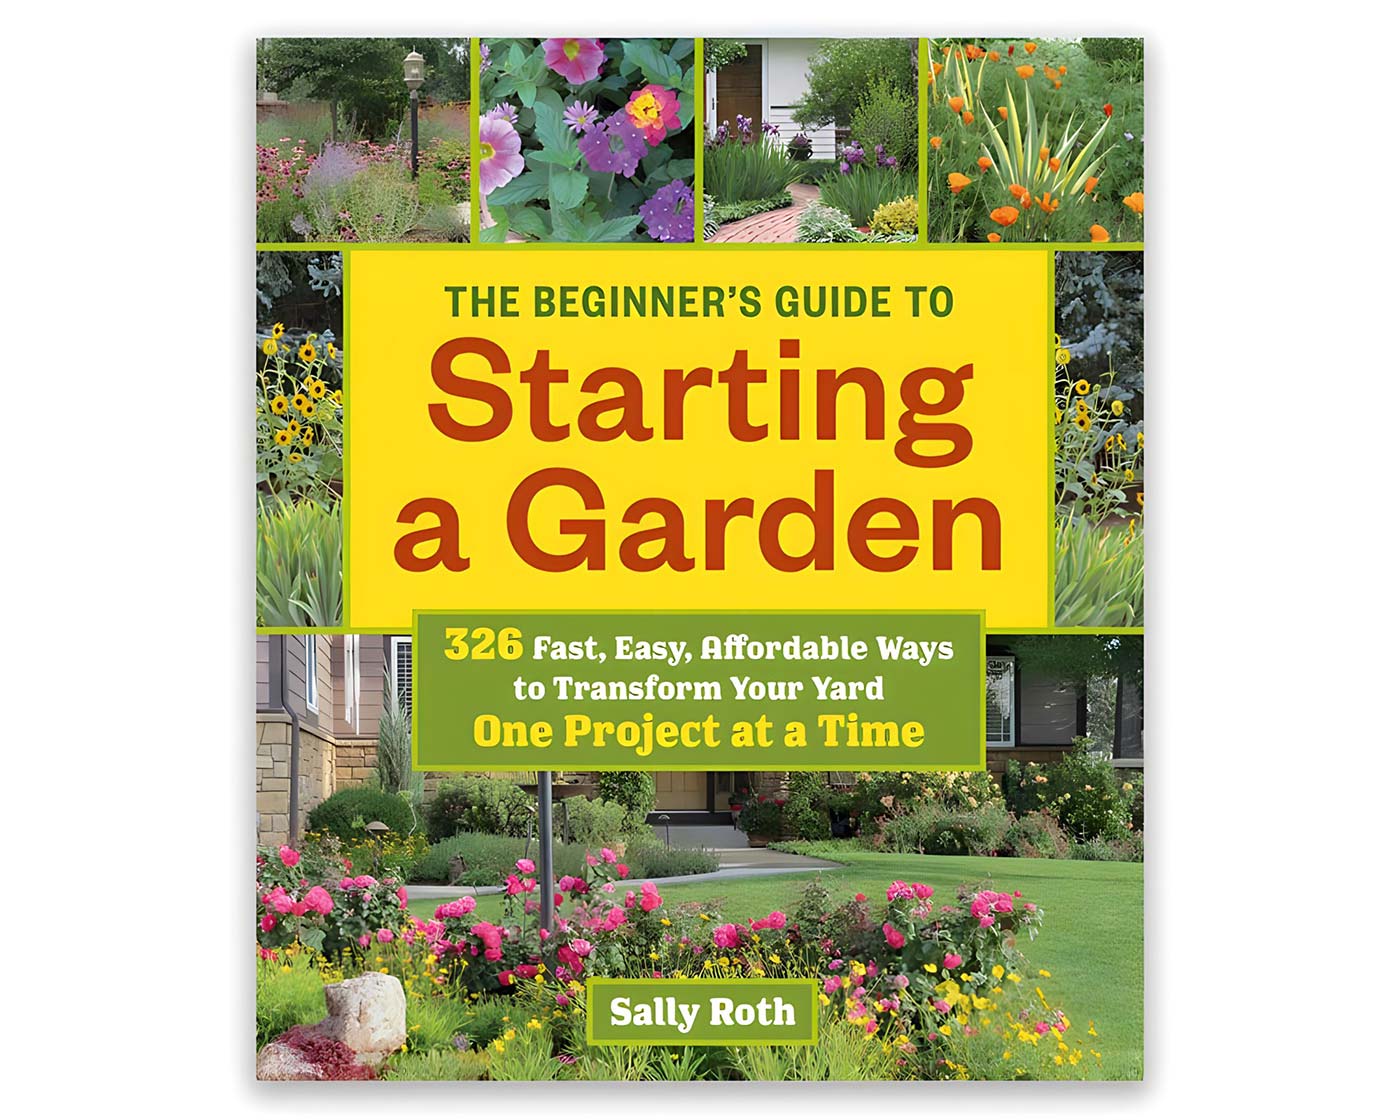 The Beginner's Guide to Starting a Garden - Sally Roth